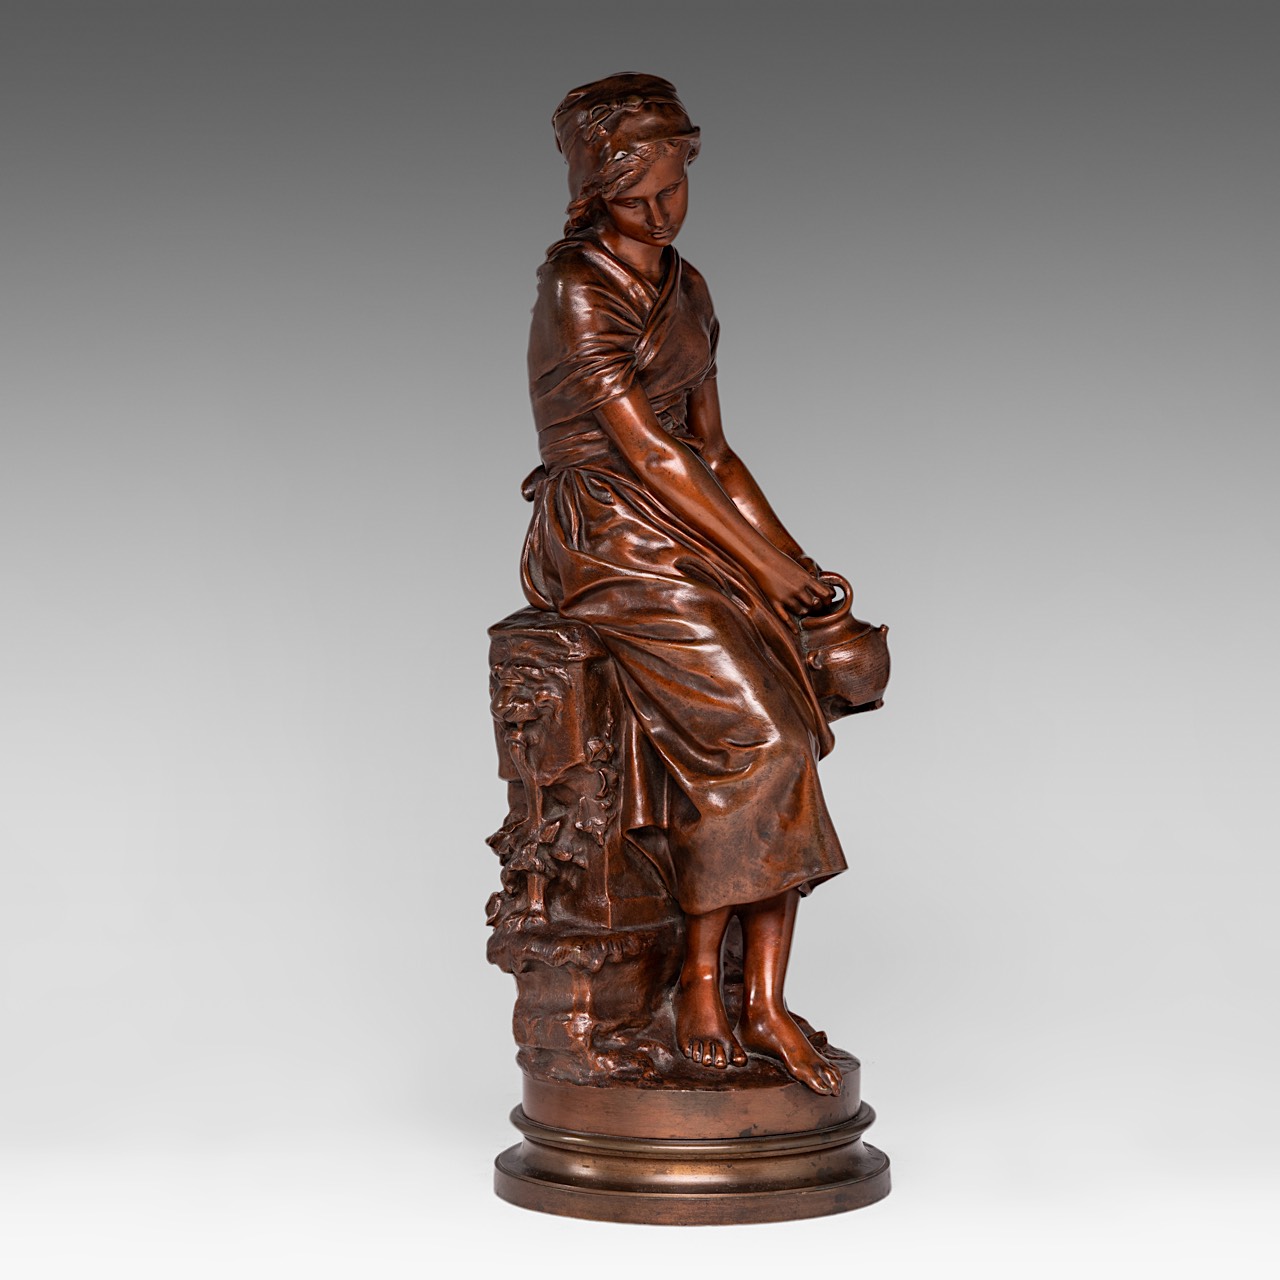 Mathurin Moreau (1822-1912), young girl with a jug, patinated bronze, foundry mark of E. Godeau, Par - Image 6 of 8